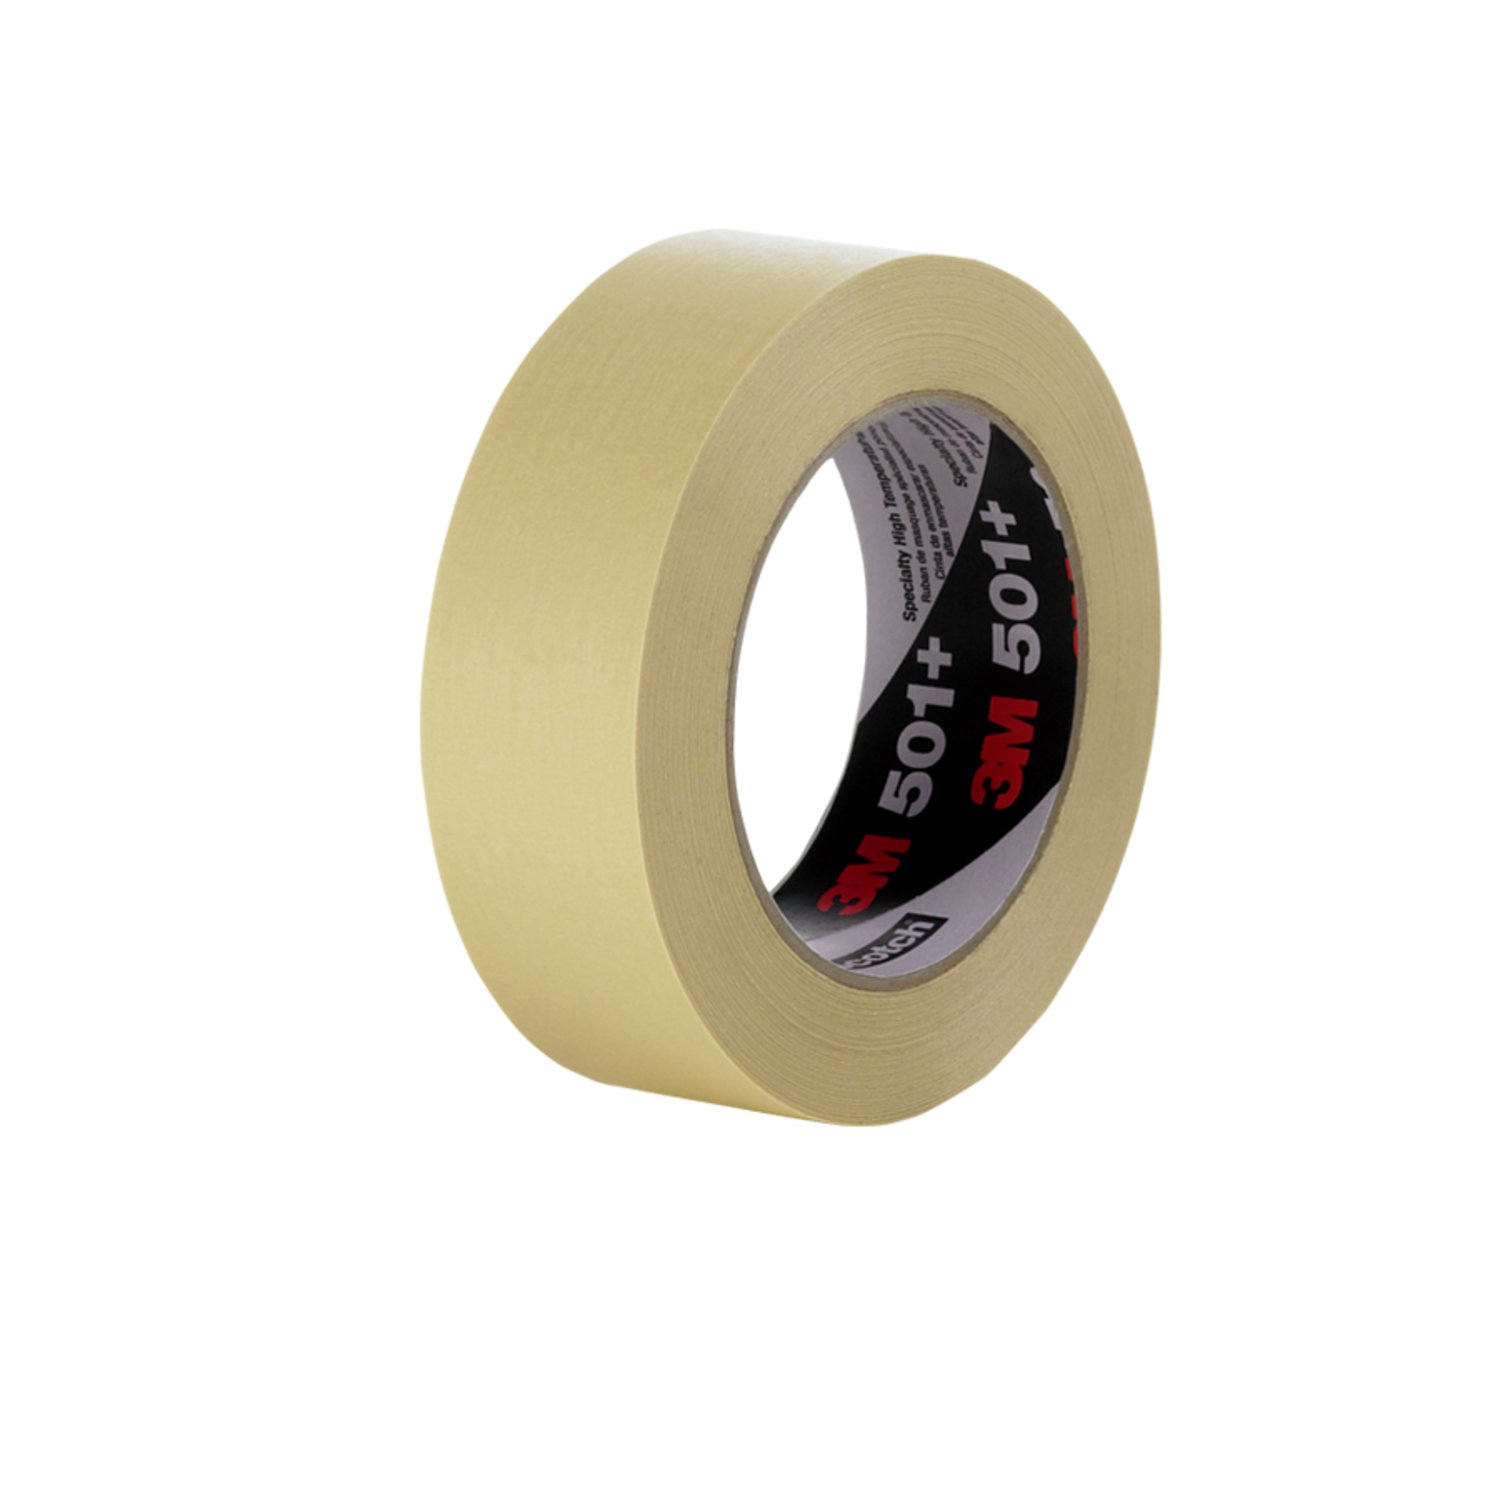 7100067847 - 3M Specialty High Temperature Masking Tape 501+, Tan, 100 mm x 55 m,
7.3 mil, 12 Roll/Case